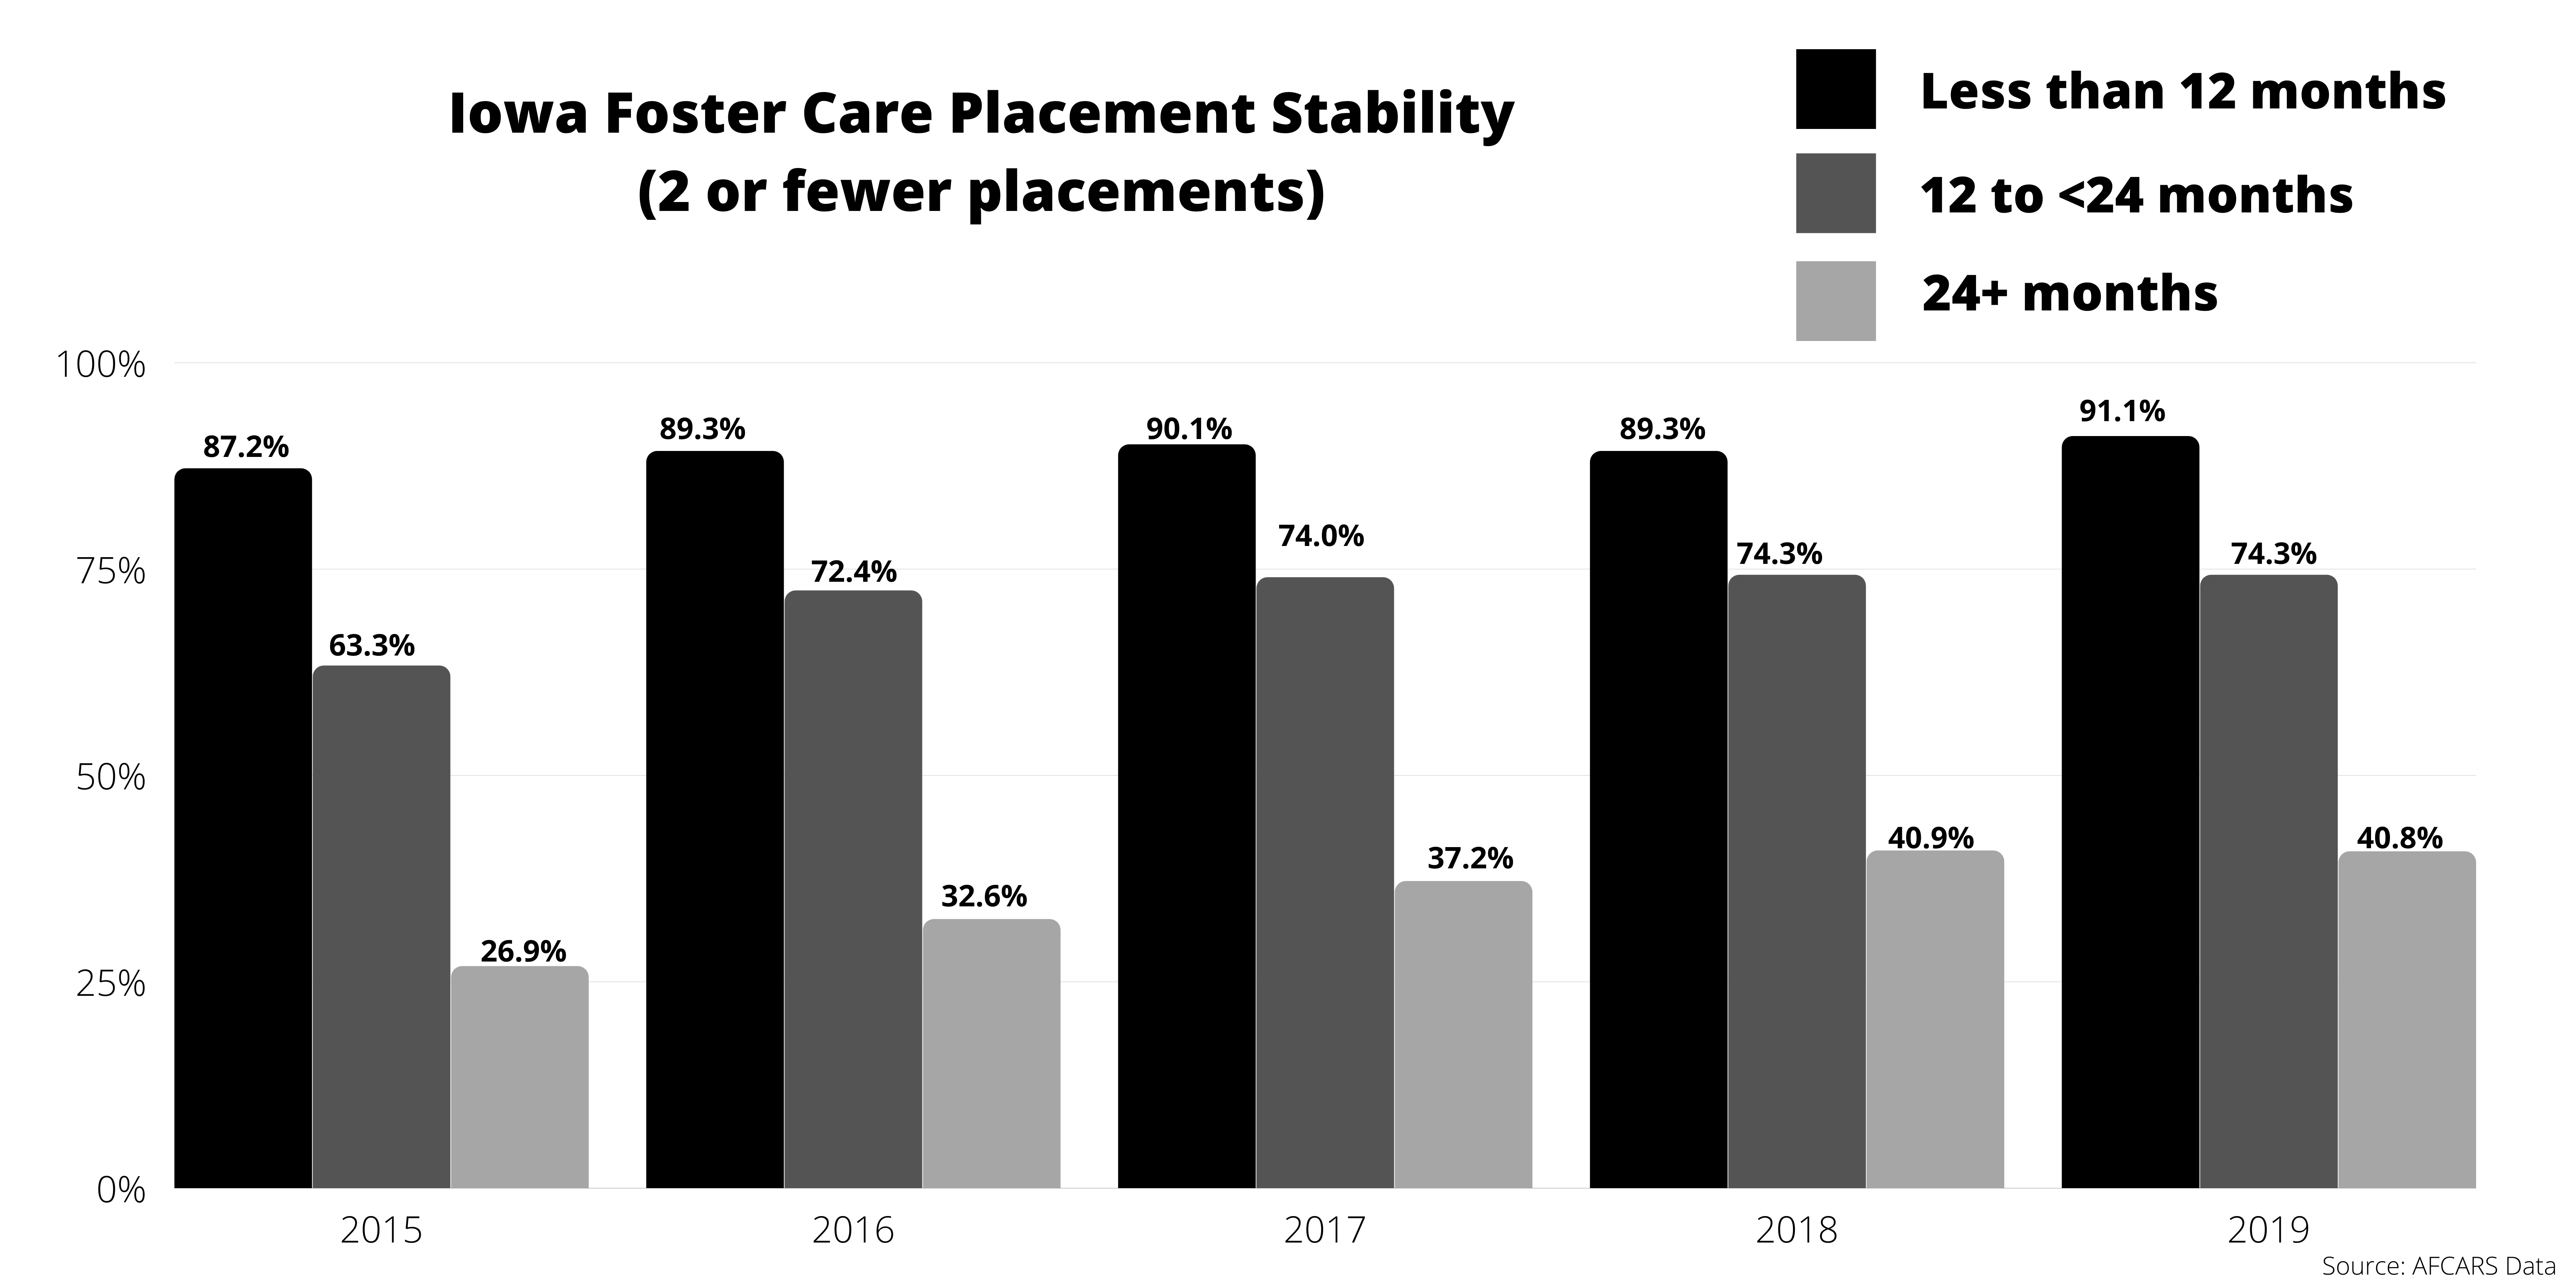 Graph of Iowa foster care placement stability from 2015 to 2019 with data from AFCARS.